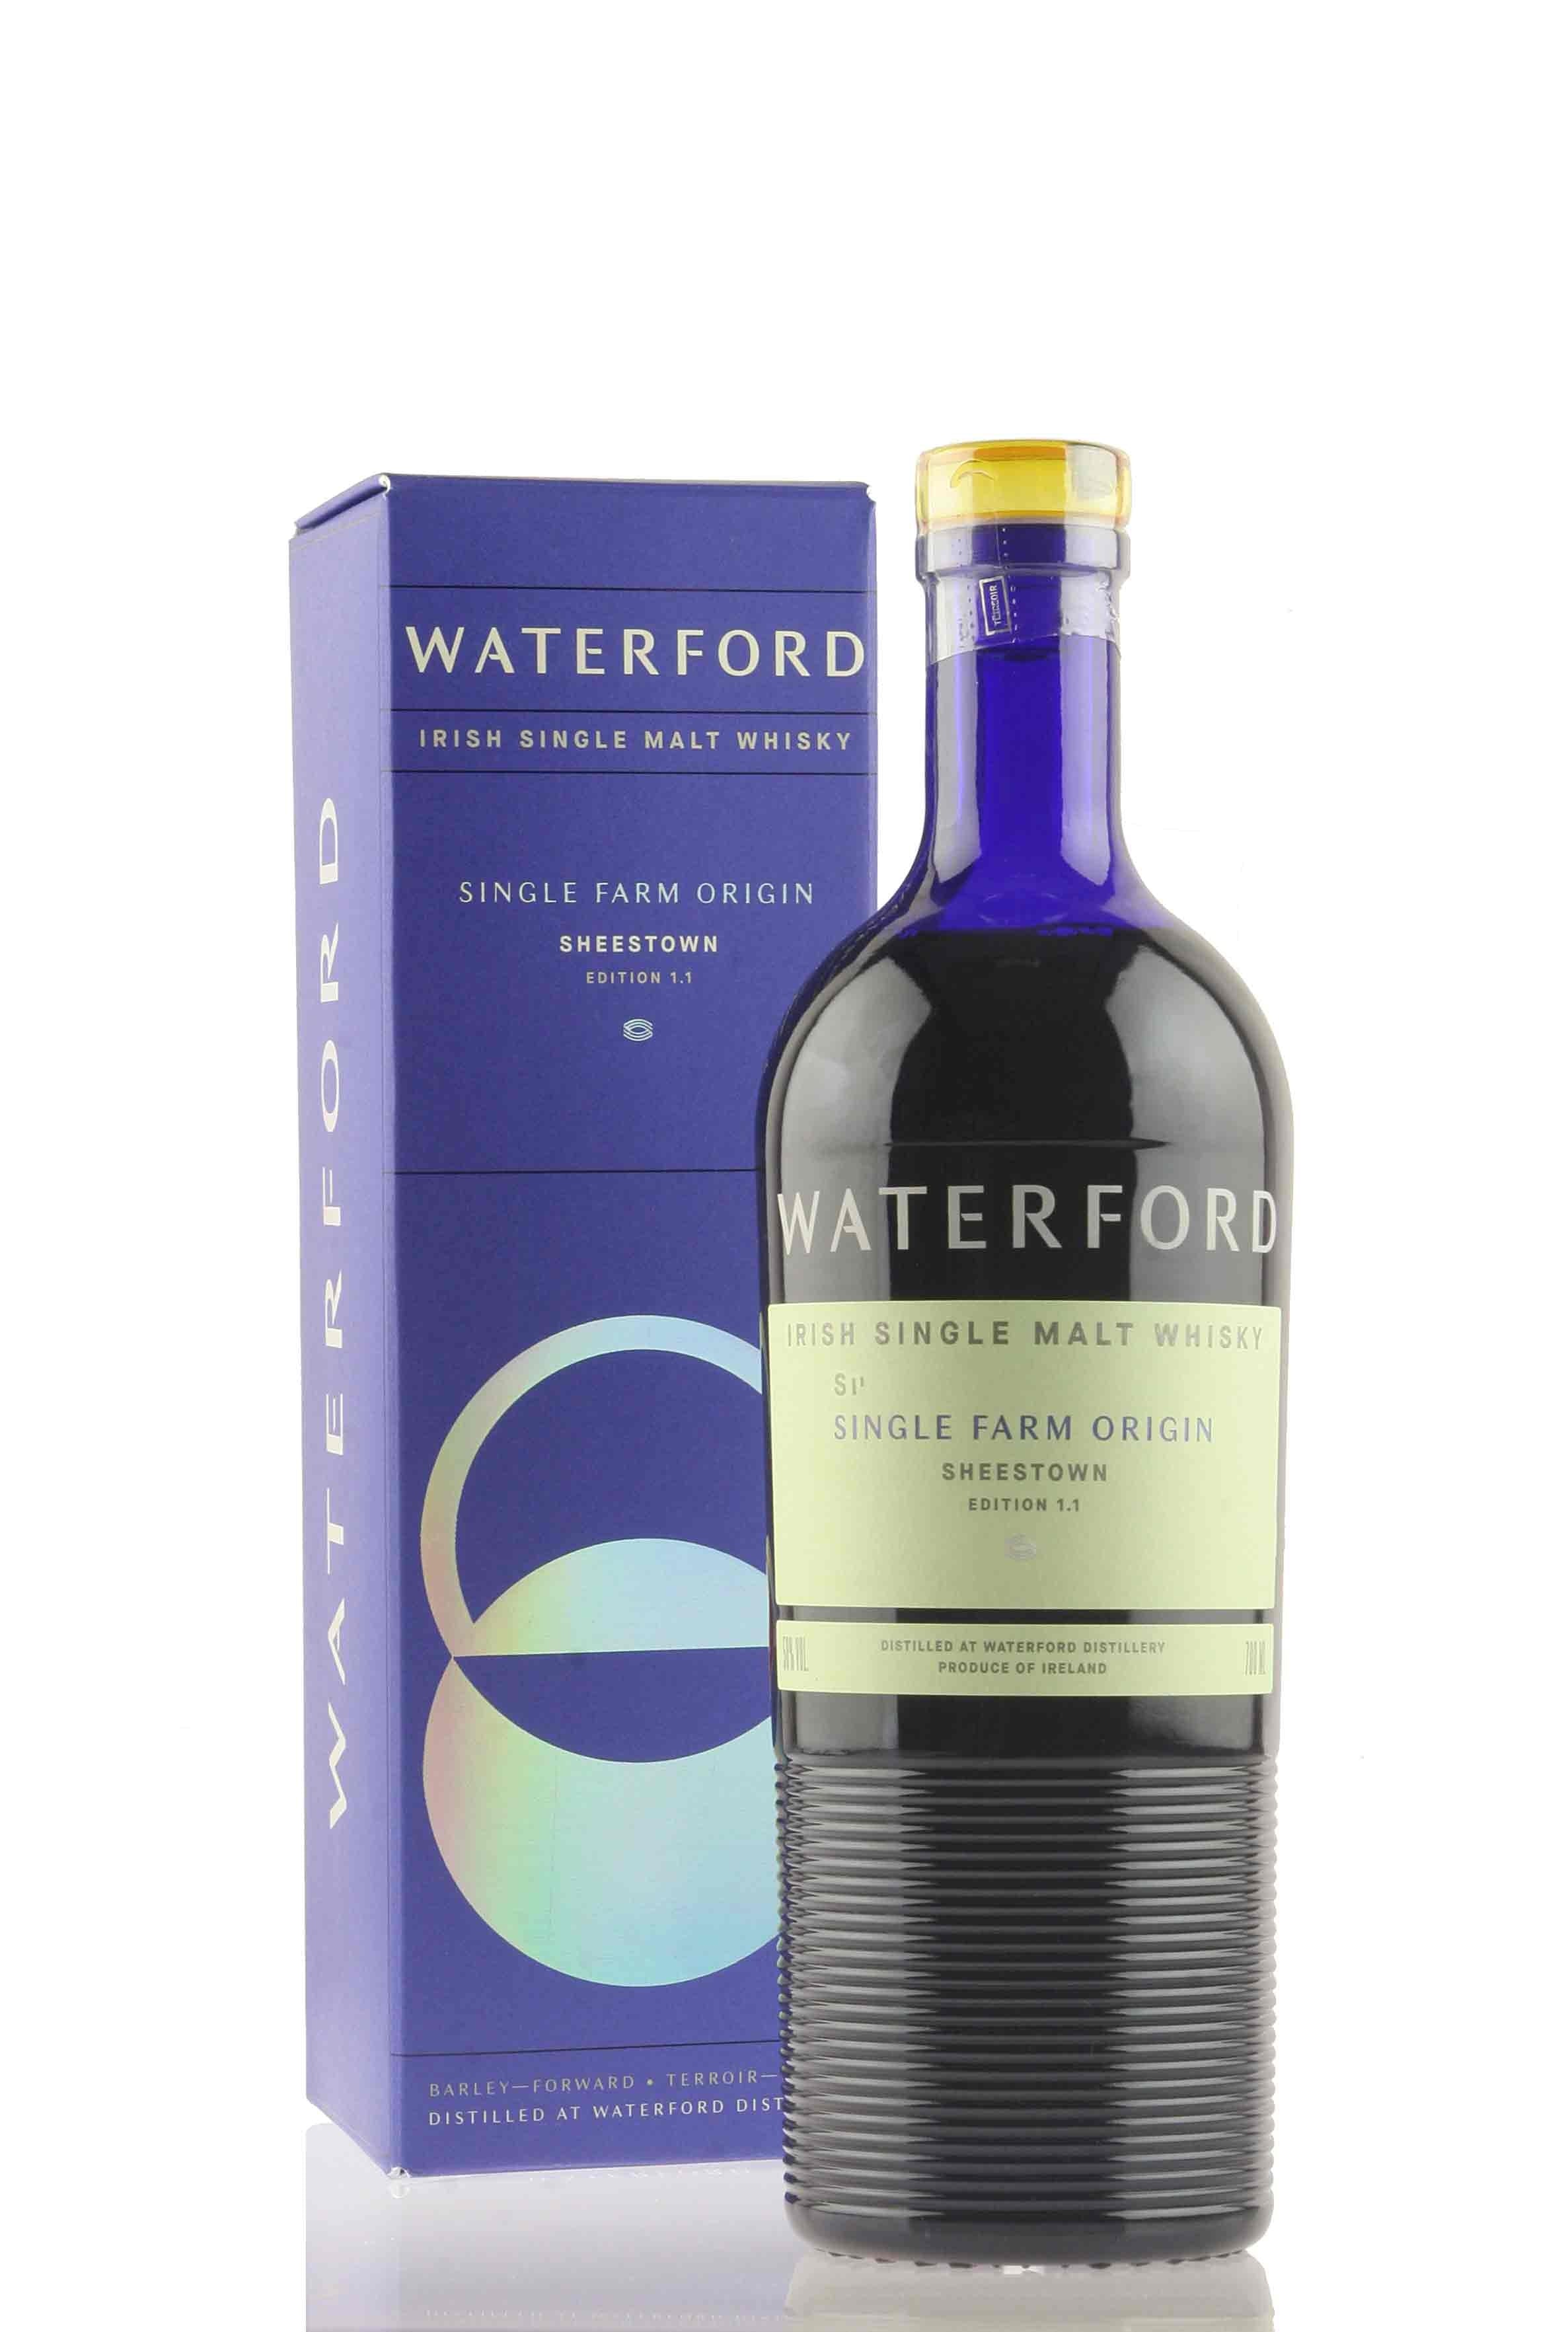 Waterford Sheestown: Edition 1.1